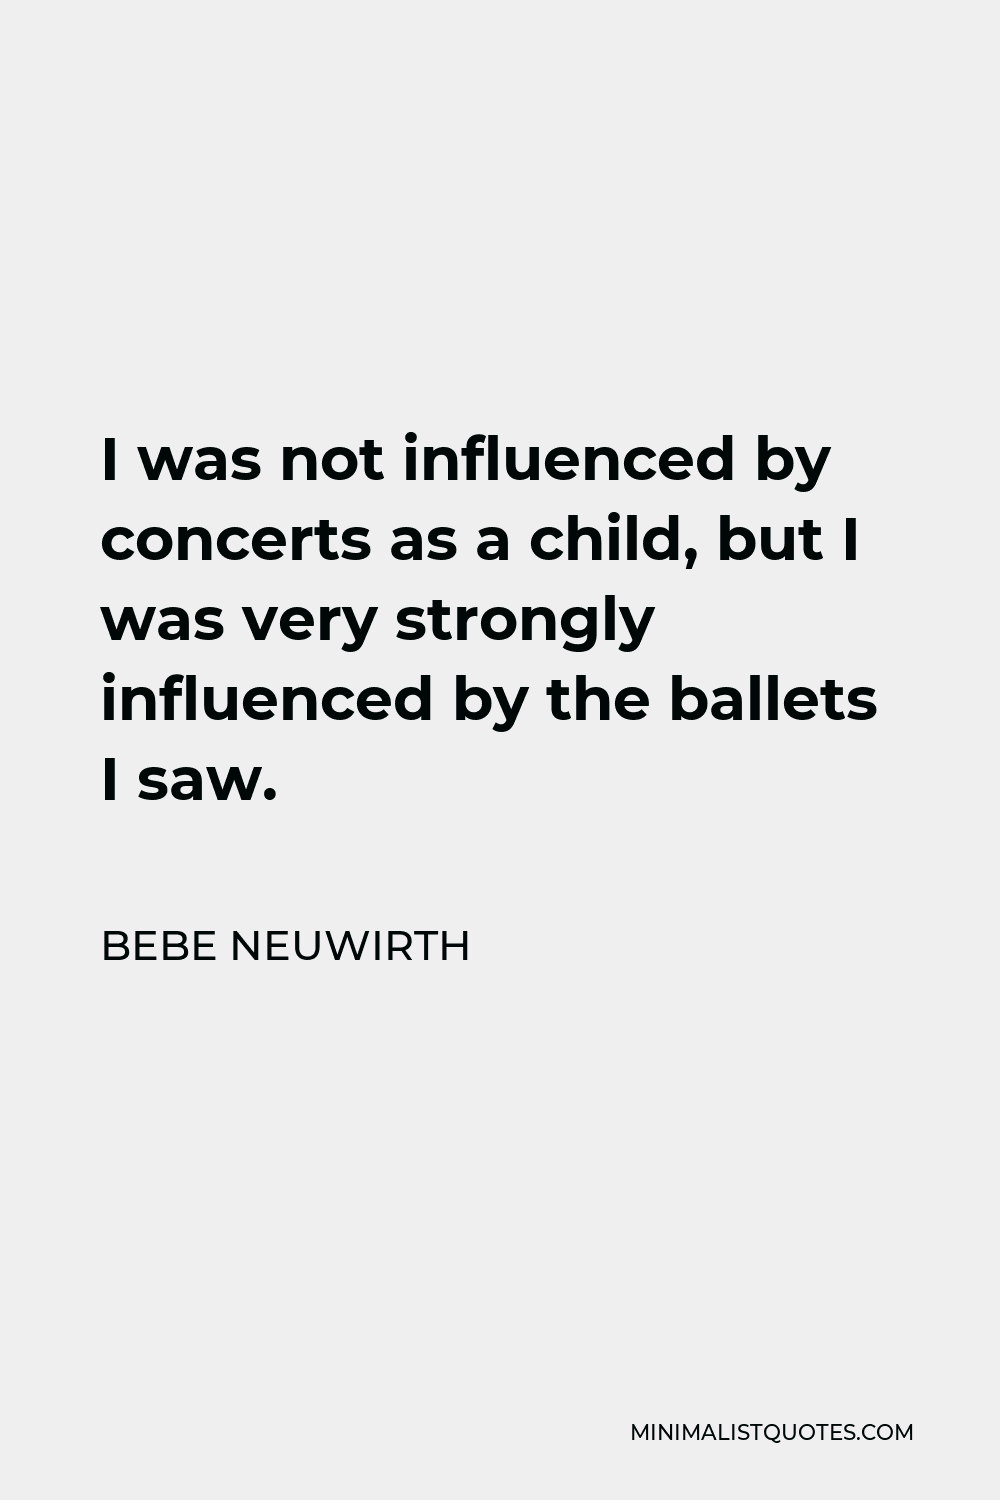 Bebe Neuwirth Quote - I was not influenced by concerts as a child, but I was very strongly influenced by the ballets I saw.